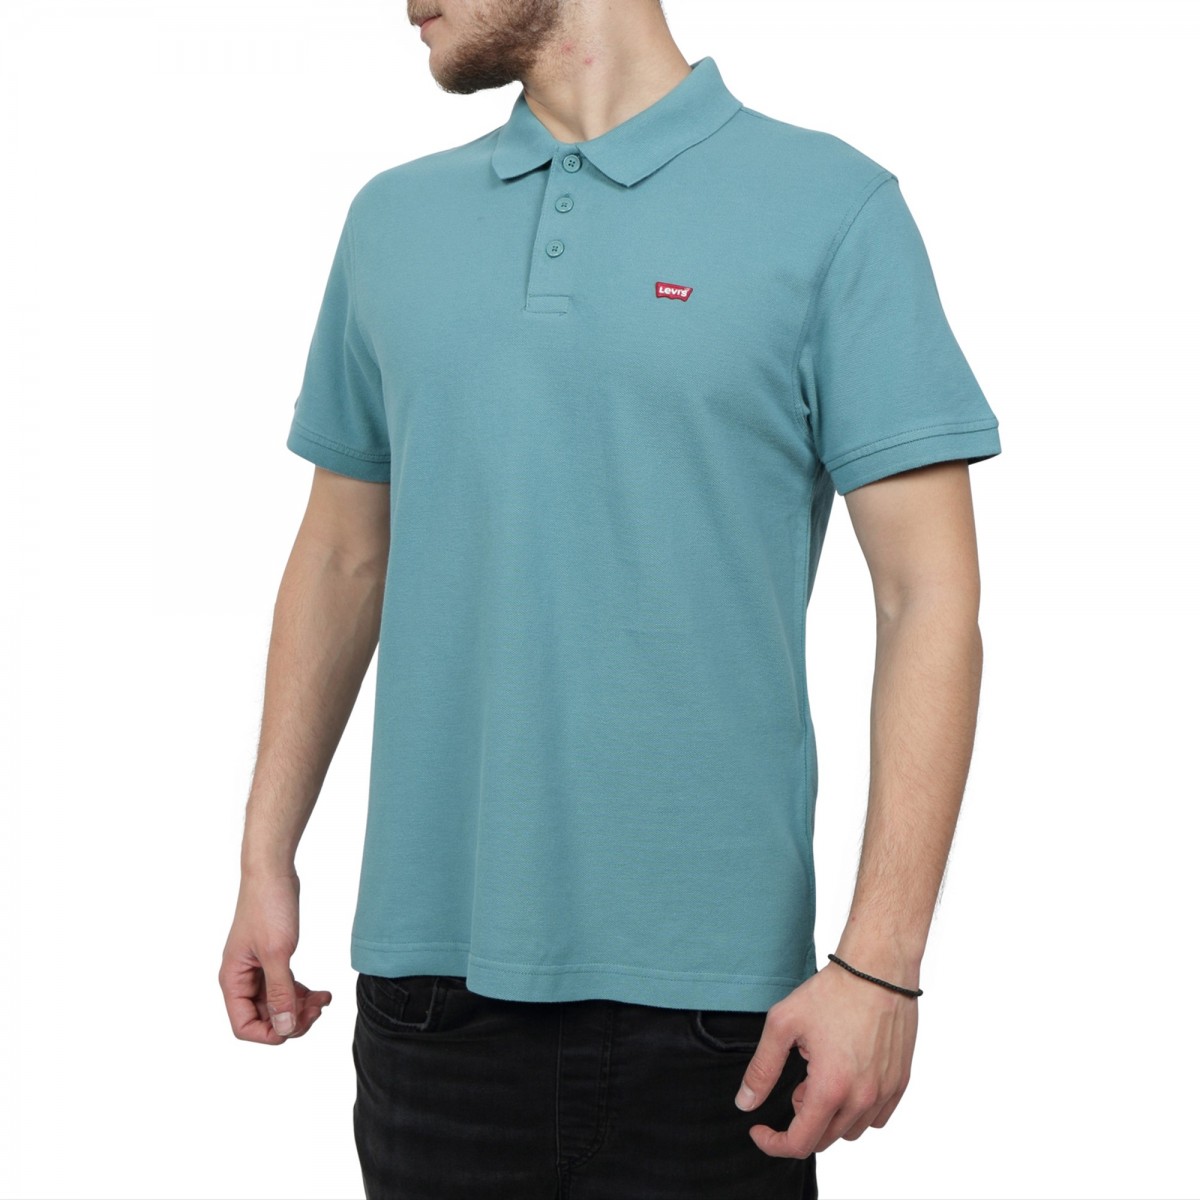 LEVIS HM POLO BRITTANY BLUE-35883-0032